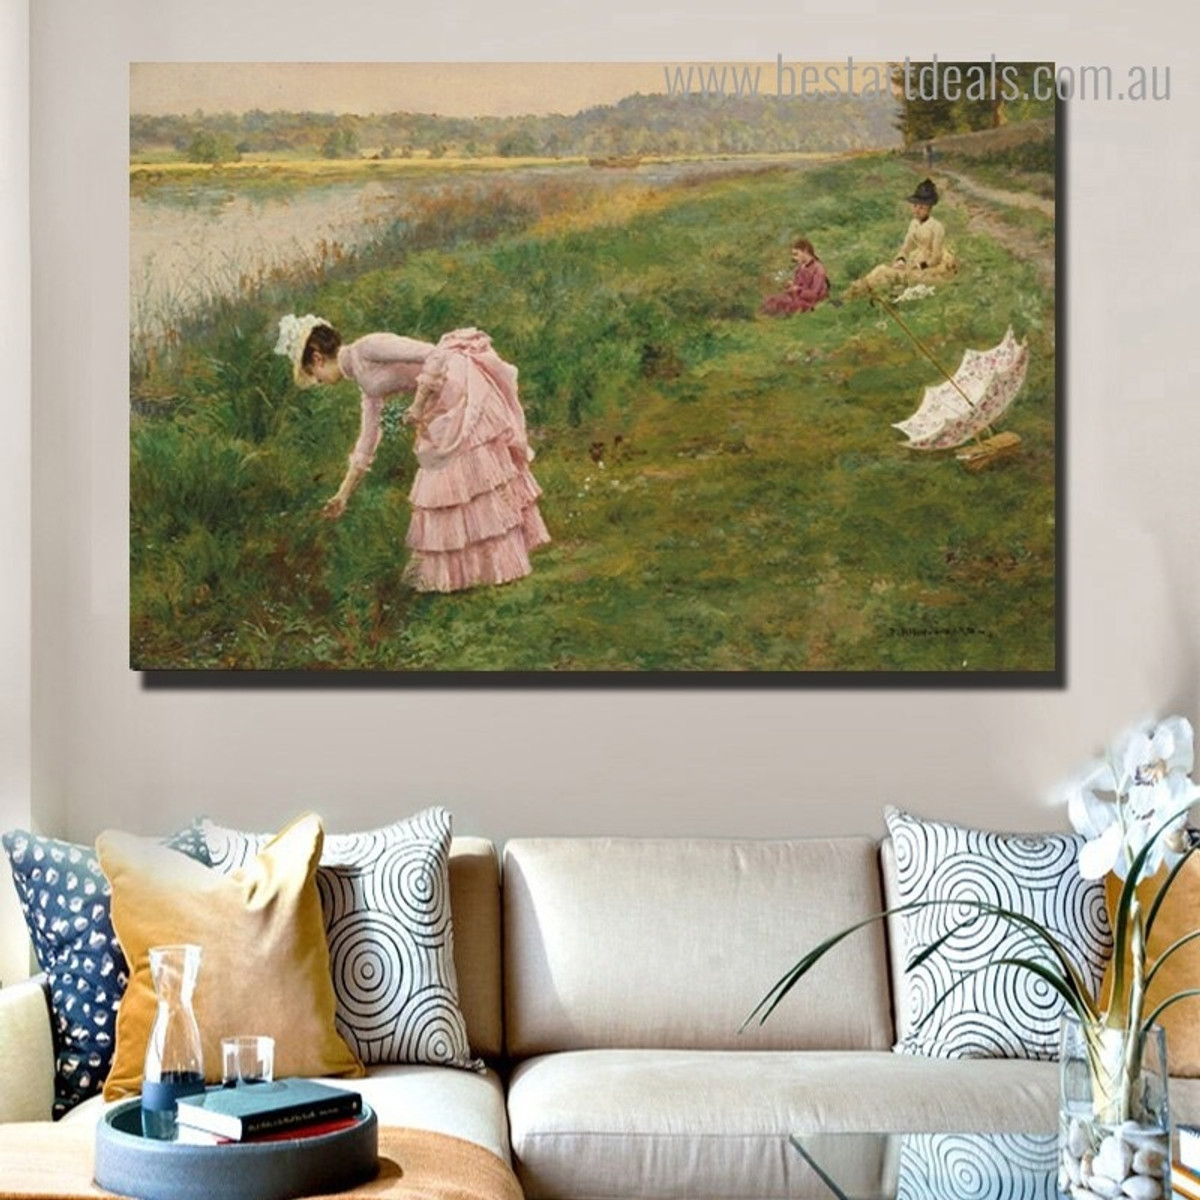 Picking Wildflowers Firmin Girard Reproduction Framed Artwork Picture Canvas Print for Room Wall Onlay